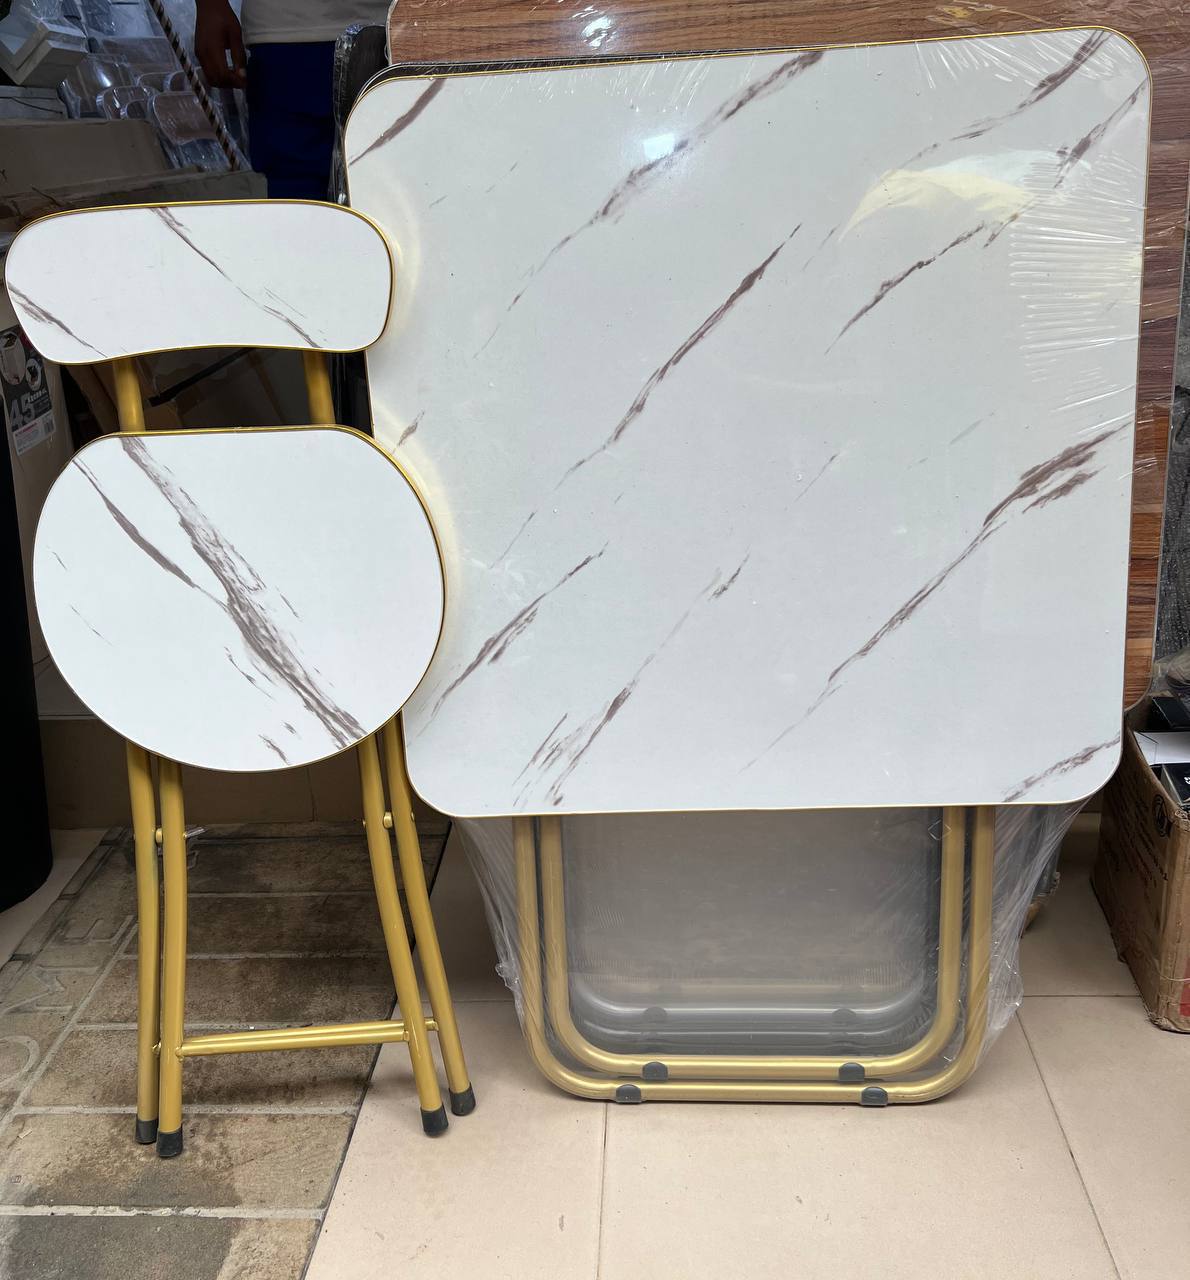 marble design foldable chair and table